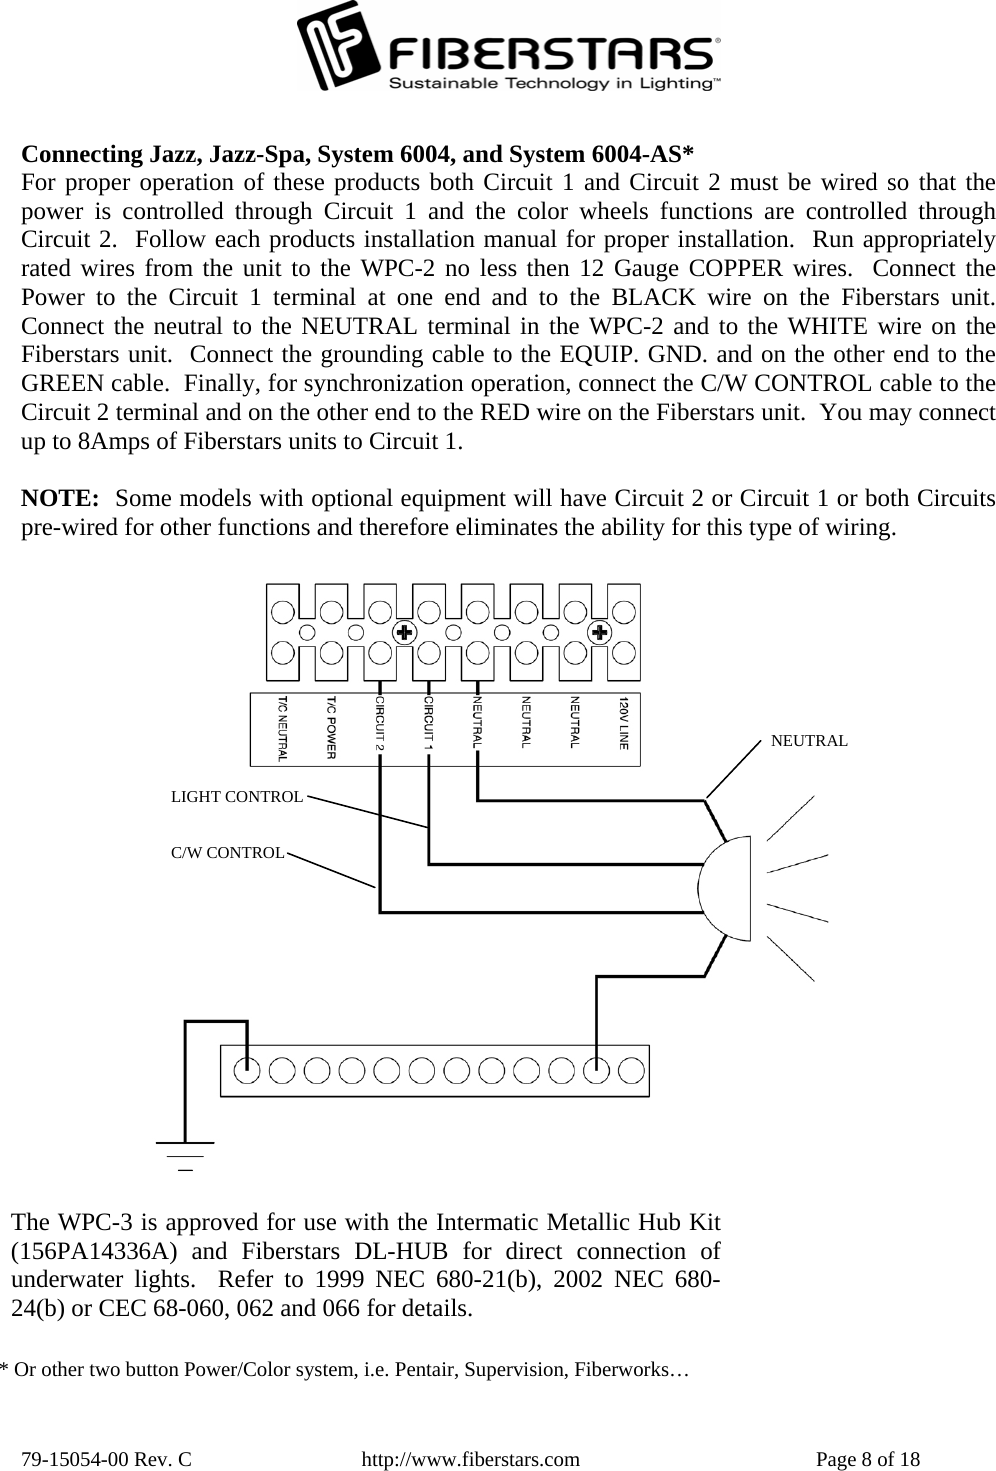  79-15054-00 Rev. C  http://www.fiberstars.com  Page 8 of 18 C/W CONTROL LIGHT CONTROL NEUTRAL The WPC-3 is approved for use with the Intermatic Metallic Hub Kit(156PA14336A) and Fiberstars DL-HUB for direct connection of underwater lights.  Refer to 1999 NEC 680-21(b), 2002 NEC 680-24(b) or CEC 68-060, 062 and 066 for details. Connecting Jazz, Jazz-Spa, System 6004, and System 6004-AS* For proper operation of these products both Circuit 1 and Circuit 2 must be wired so that the power is controlled through Circuit 1 and the color wheels functions are controlled throughCircuit 2.  Follow each products installation manual for proper installation.  Run appropriatelyrated wires from the unit to the WPC-2 no less then 12 Gauge COPPER wires.  Connect thePower to the Circuit 1 terminal at one end and to the BLACK wire on the Fiberstars unit.Connect the neutral to the NEUTRAL terminal in the WPC-2 and to the WHITE wire on the Fiberstars unit.  Connect the grounding cable to the EQUIP. GND. and on the other end to the GREEN cable.  Finally, for synchronization operation, connect the C/W CONTROL cable to theCircuit 2 terminal and on the other end to the RED wire on the Fiberstars unit.  You may connect up to 8Amps of Fiberstars units to Circuit 1.  NOTE:  Some models with optional equipment will have Circuit 2 or Circuit 1 or both Circuitspre-wired for other functions and therefore eliminates the ability for this type of wiring. * Or other two button Power/Color system, i.e. Pentair, Supervision, Fiberworks… 